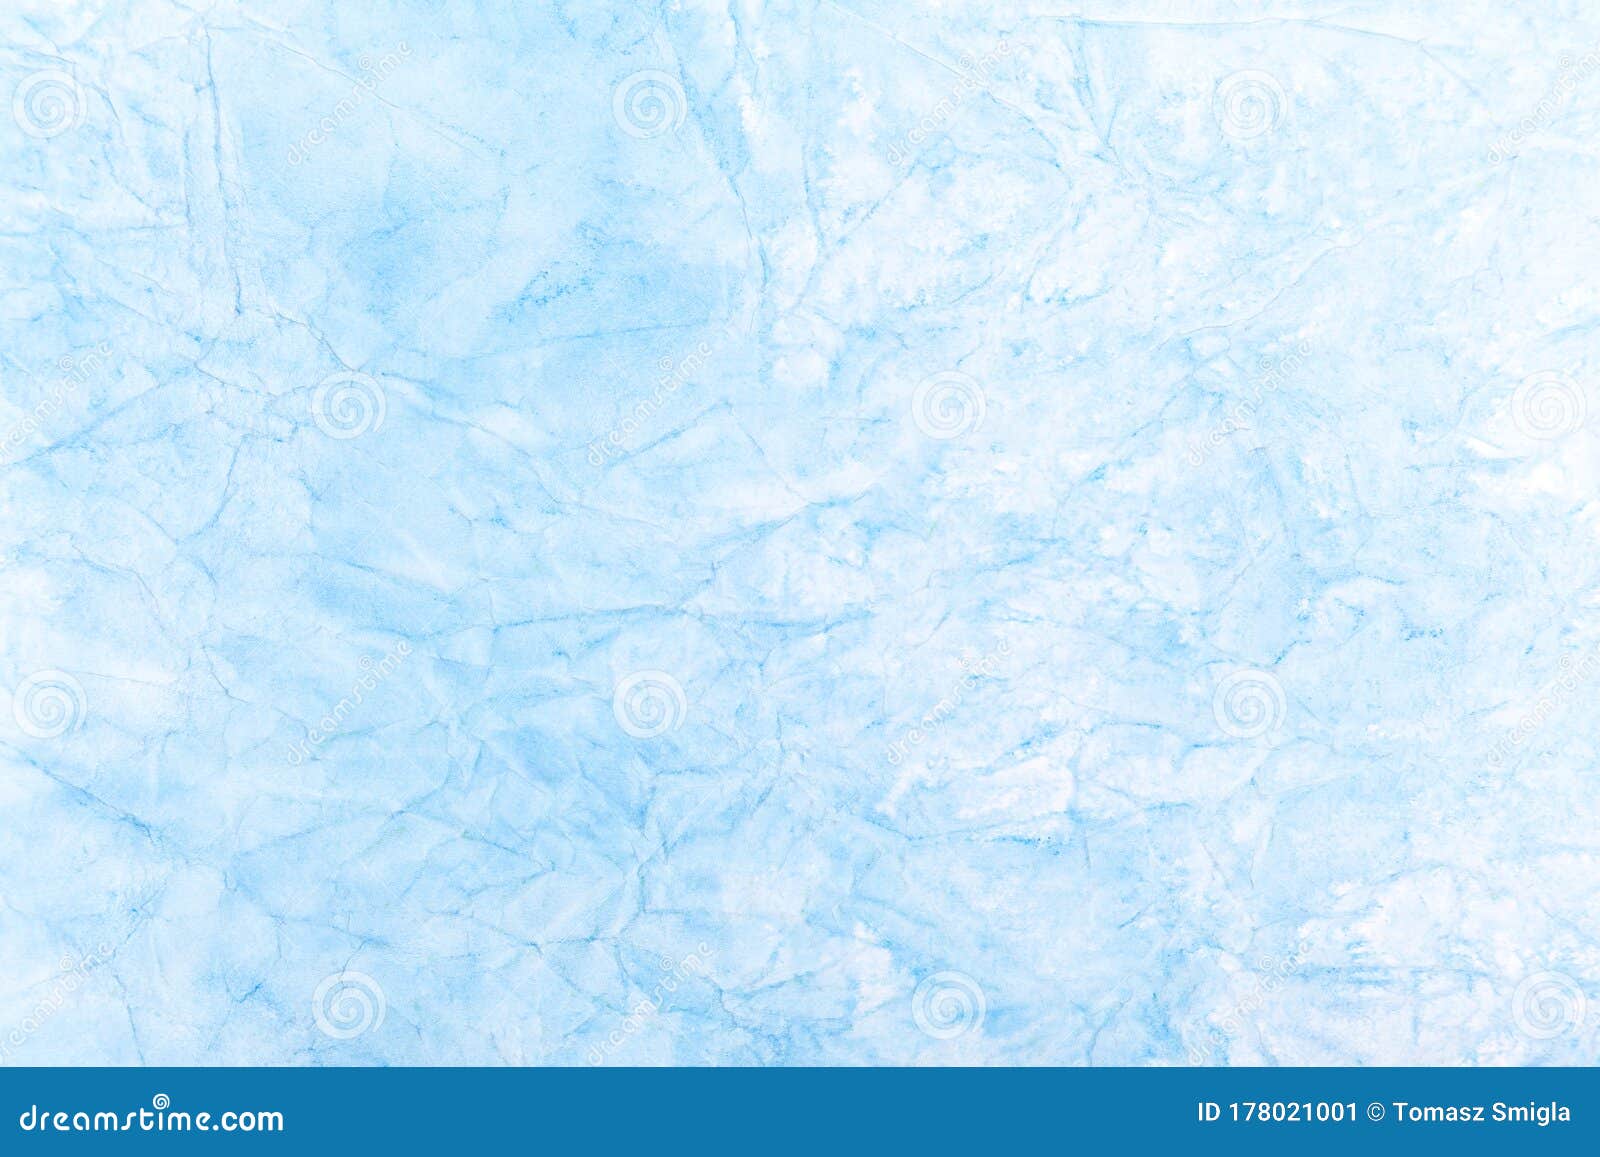 Simple Light Blue Abstract Background Texture, Blue Ice Like ...